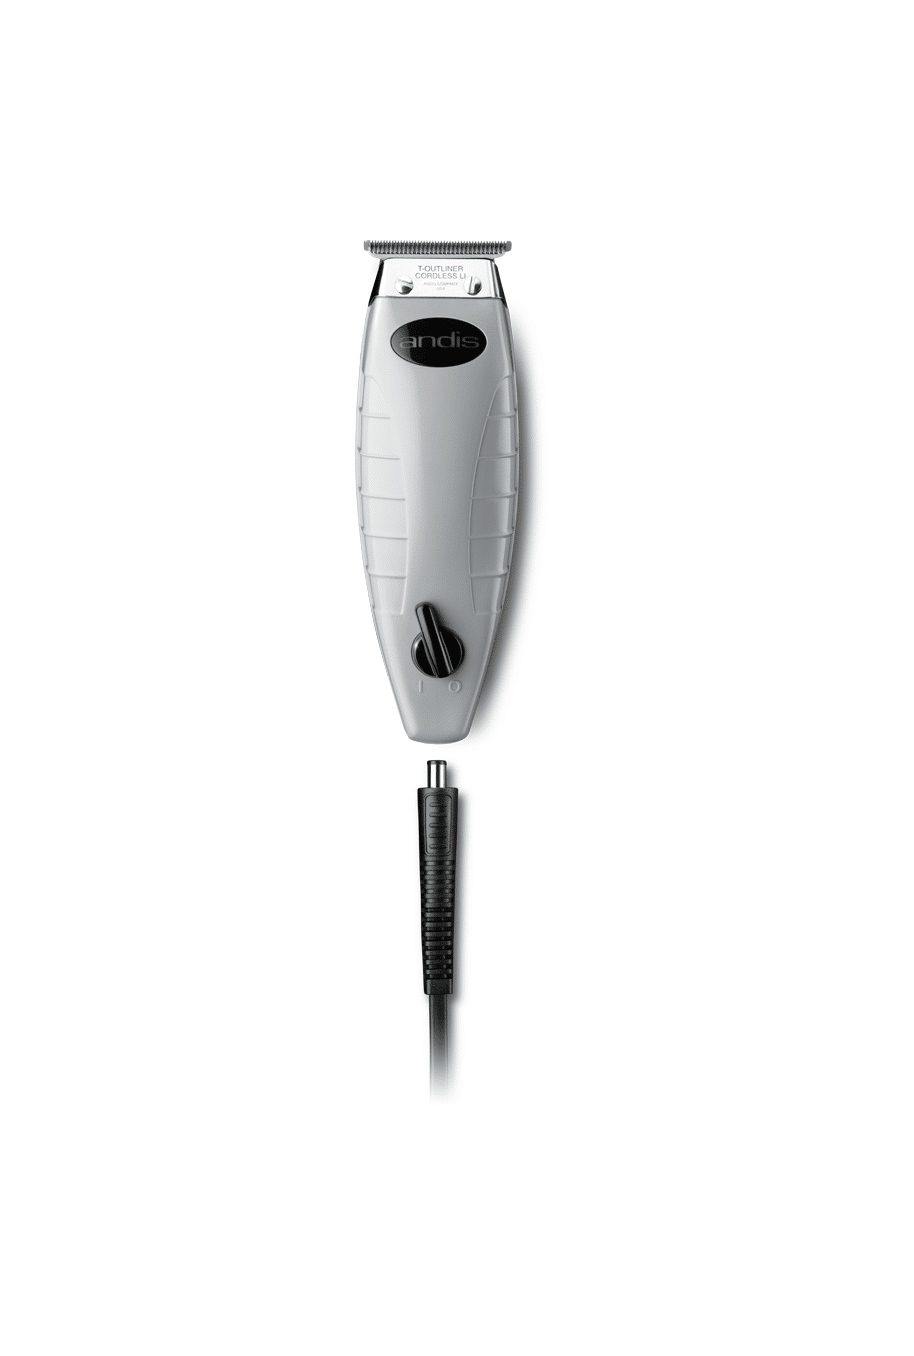 andis t outliner cordless replacement blade